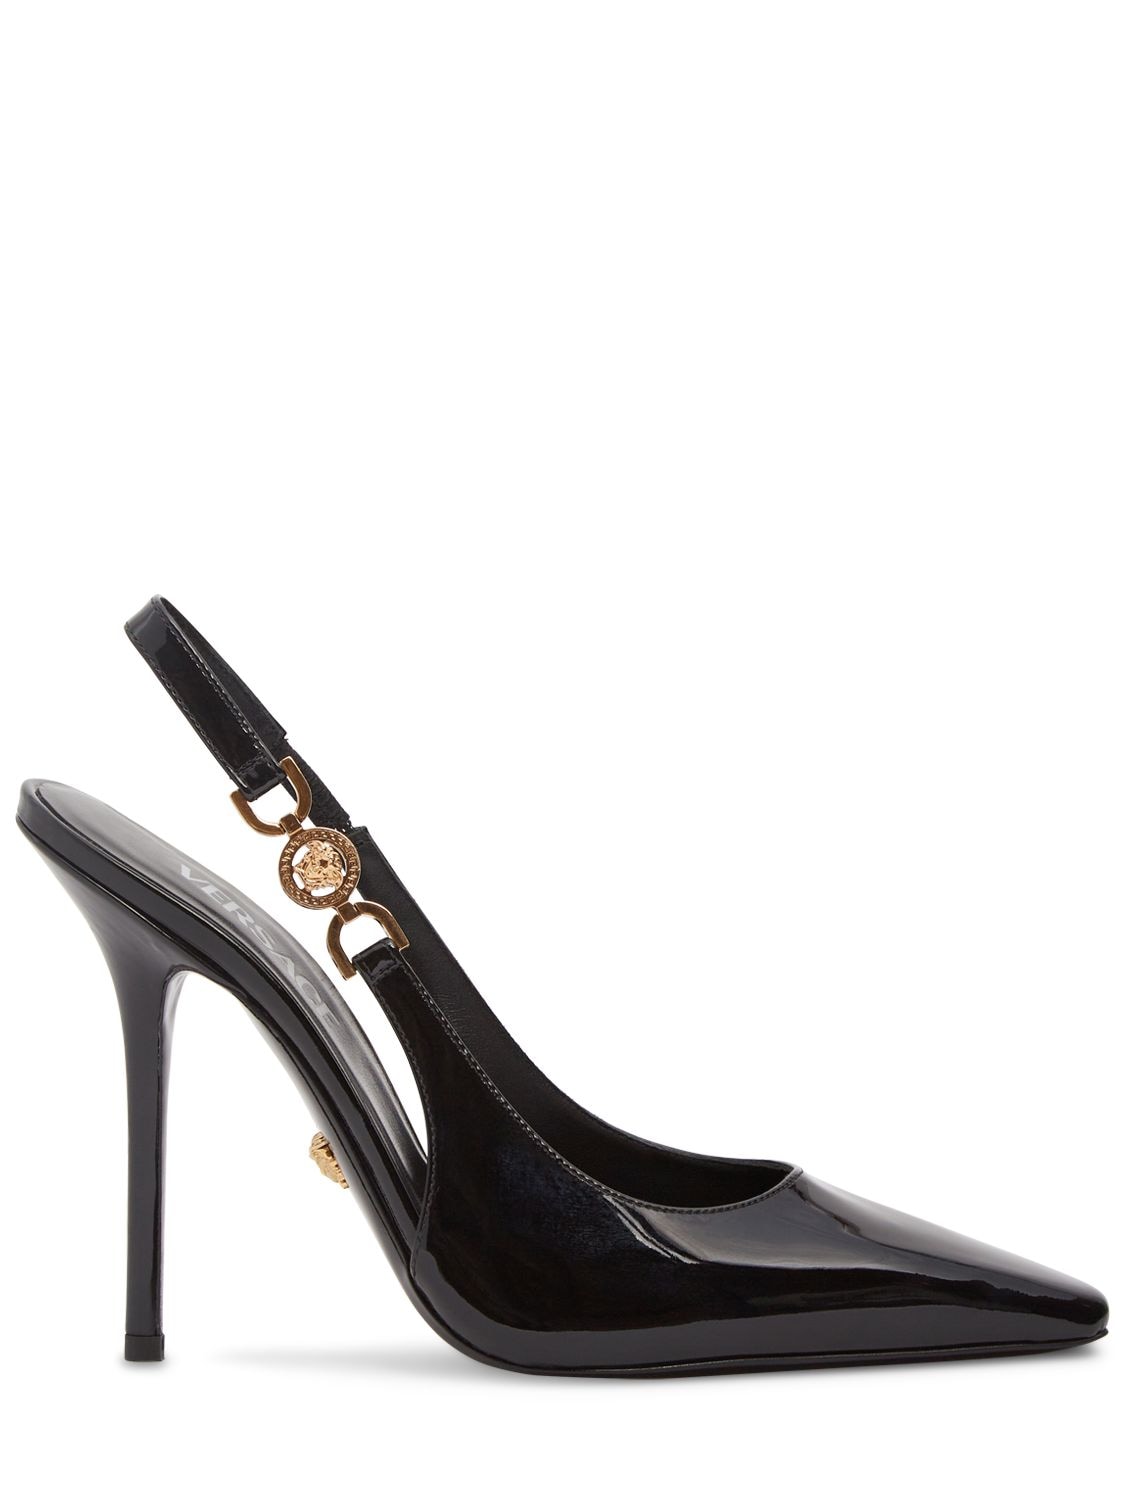 Image of 110mm Patent Leather Slingback Heels